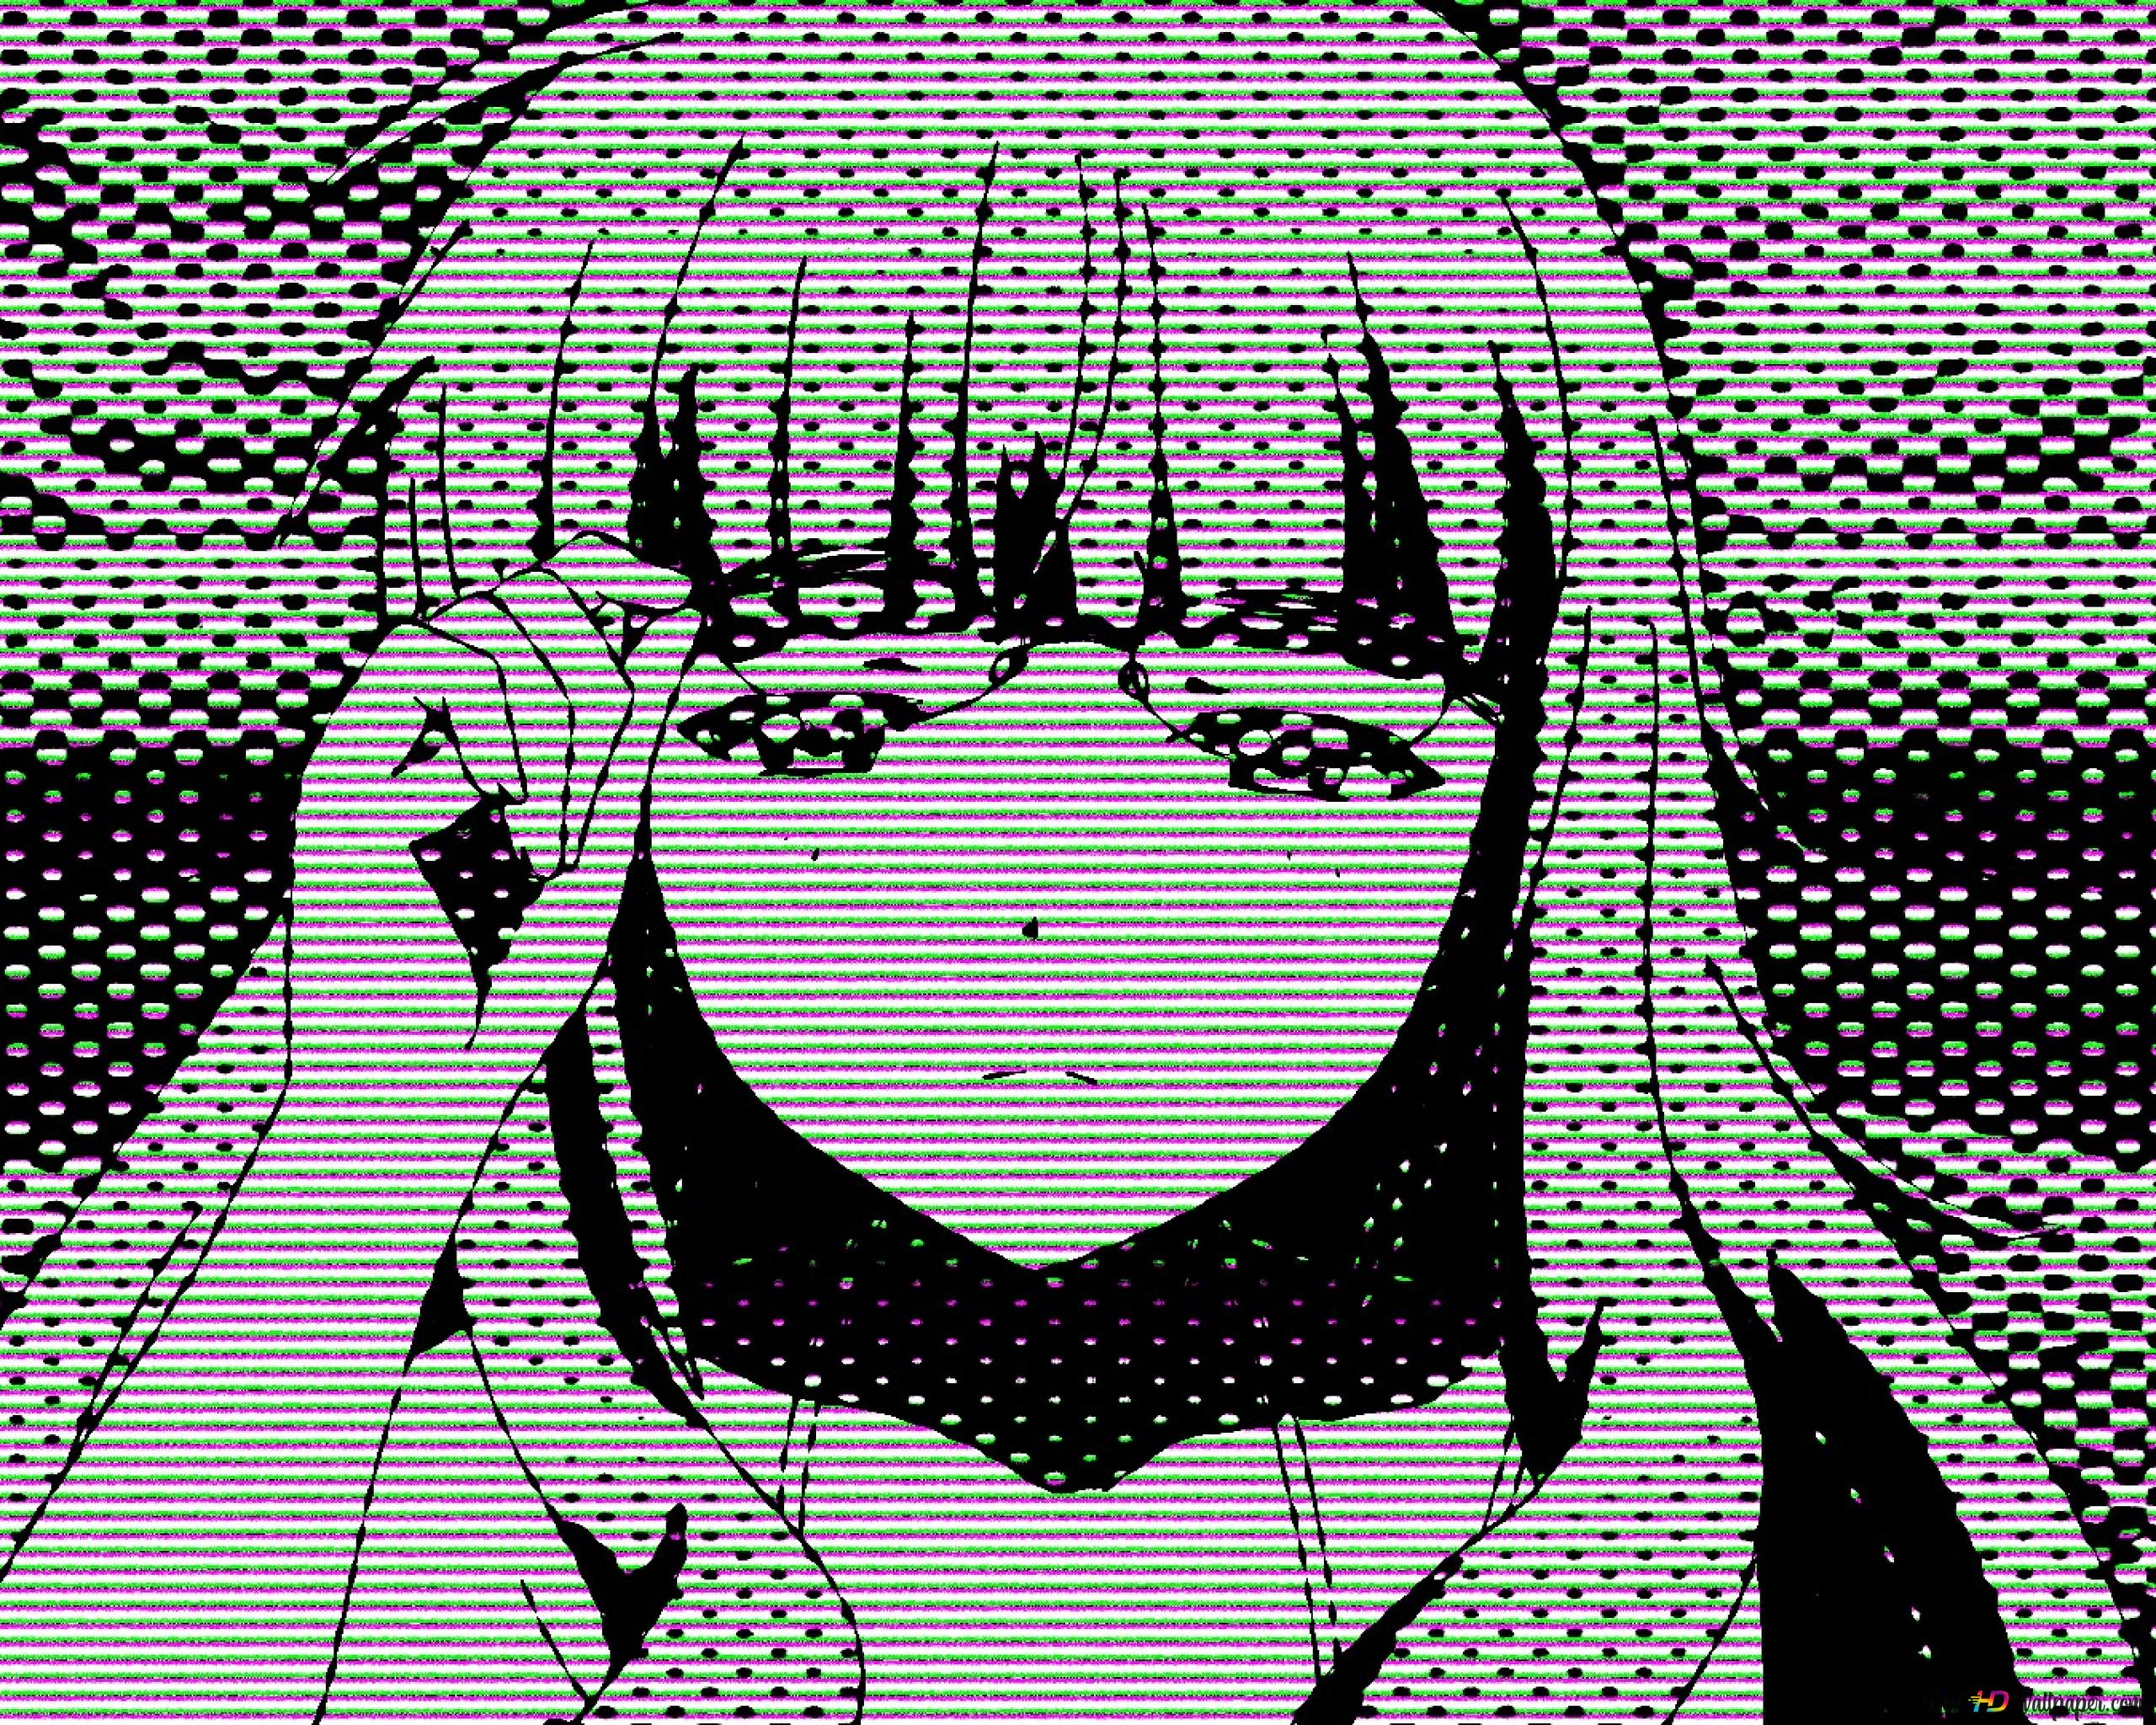 Anime girl with long hair in a pixelated image - Witch